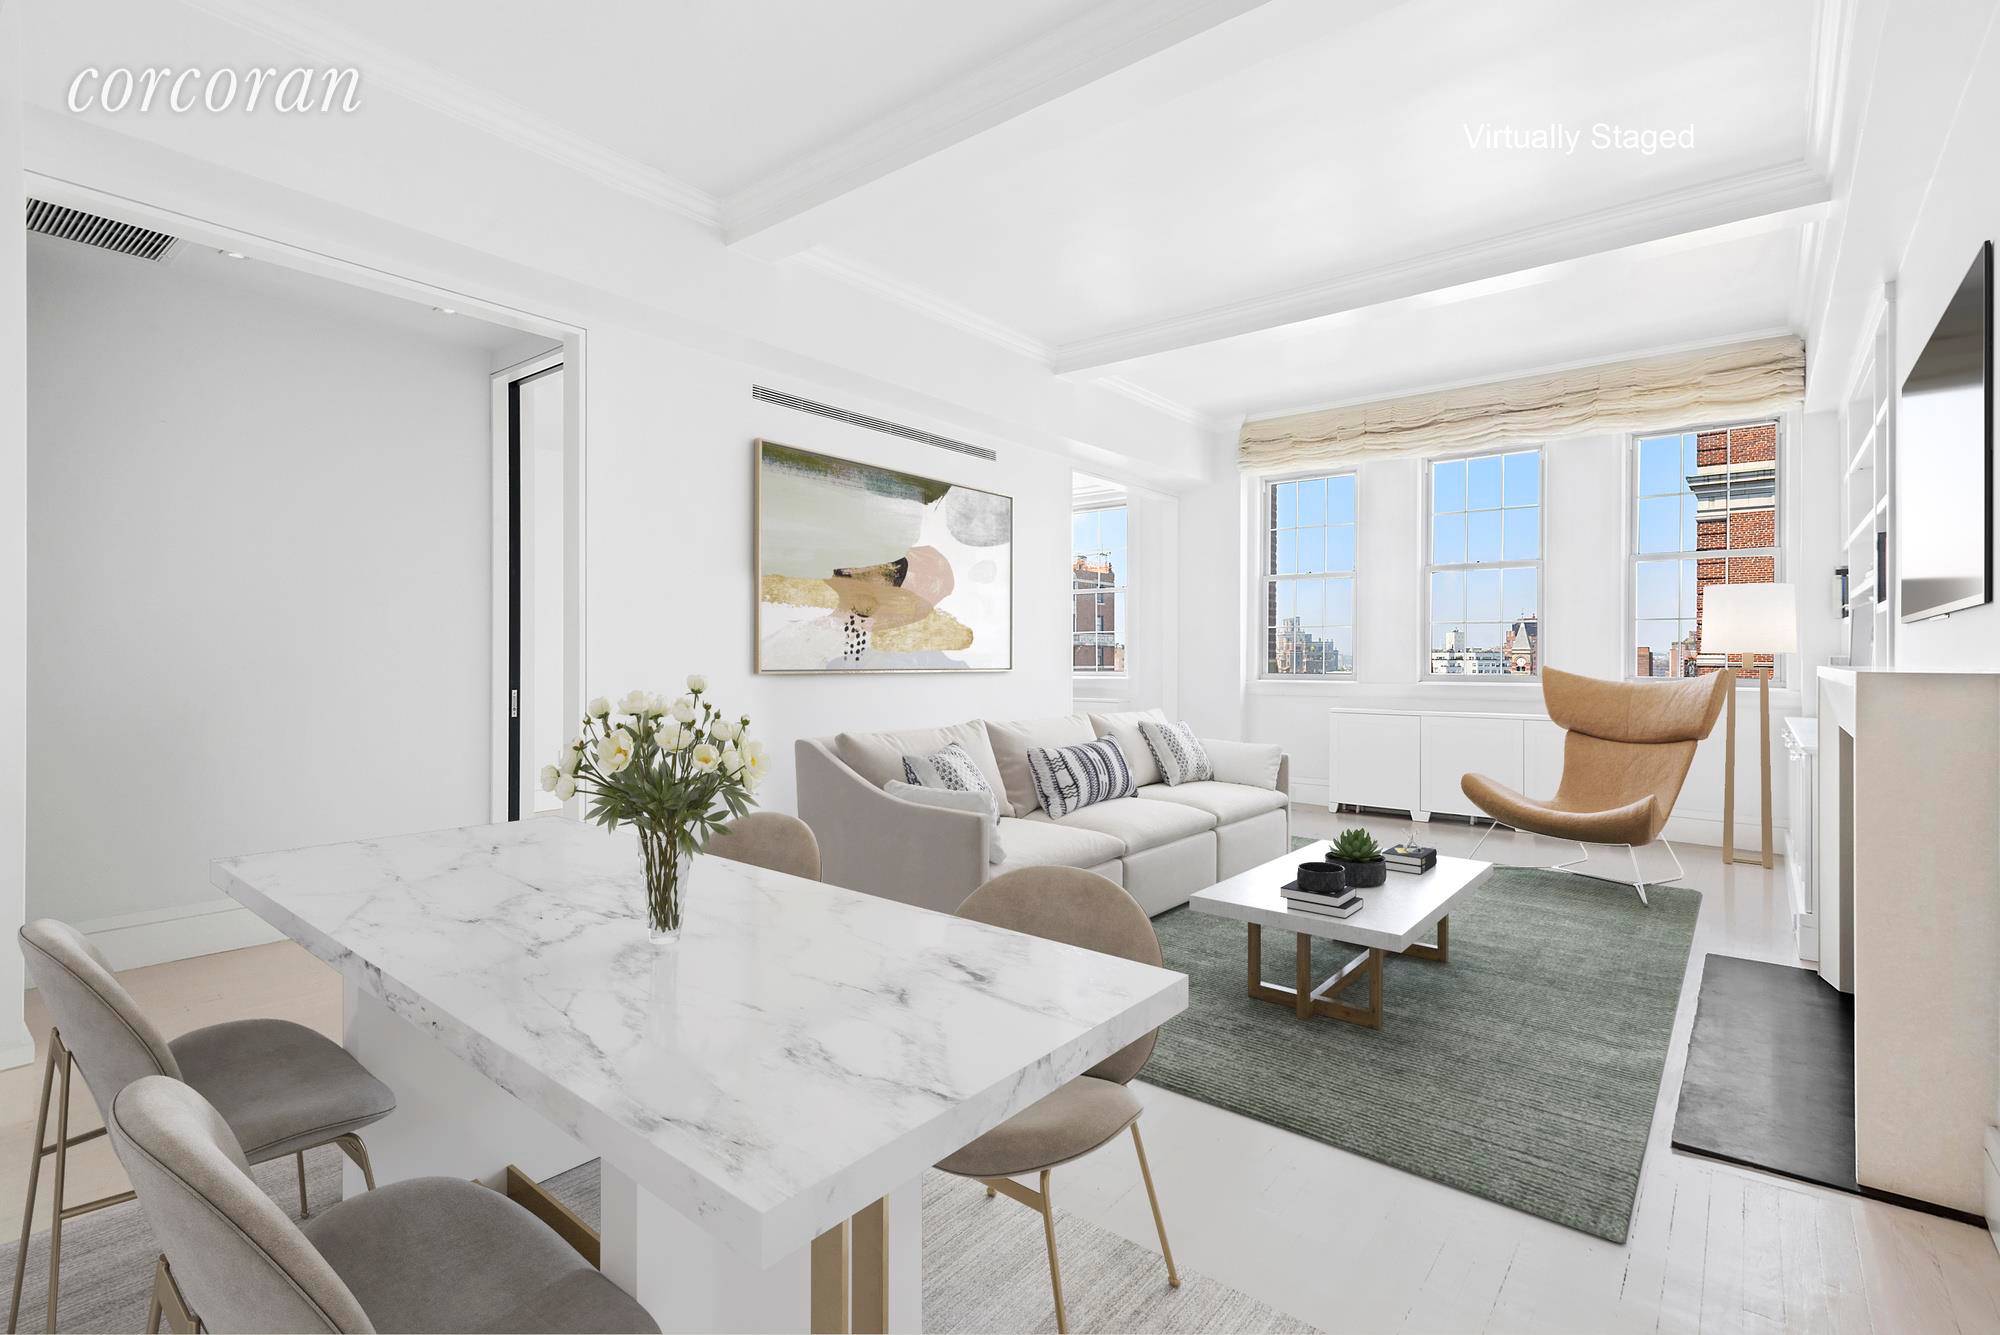 Perched high above lower Fifth Avenue in the heart of Greenwich Village, this marvelously bright and meticulously renovated one bedroom with central air, fireplace and 10ft ceilings is the quintessential ...